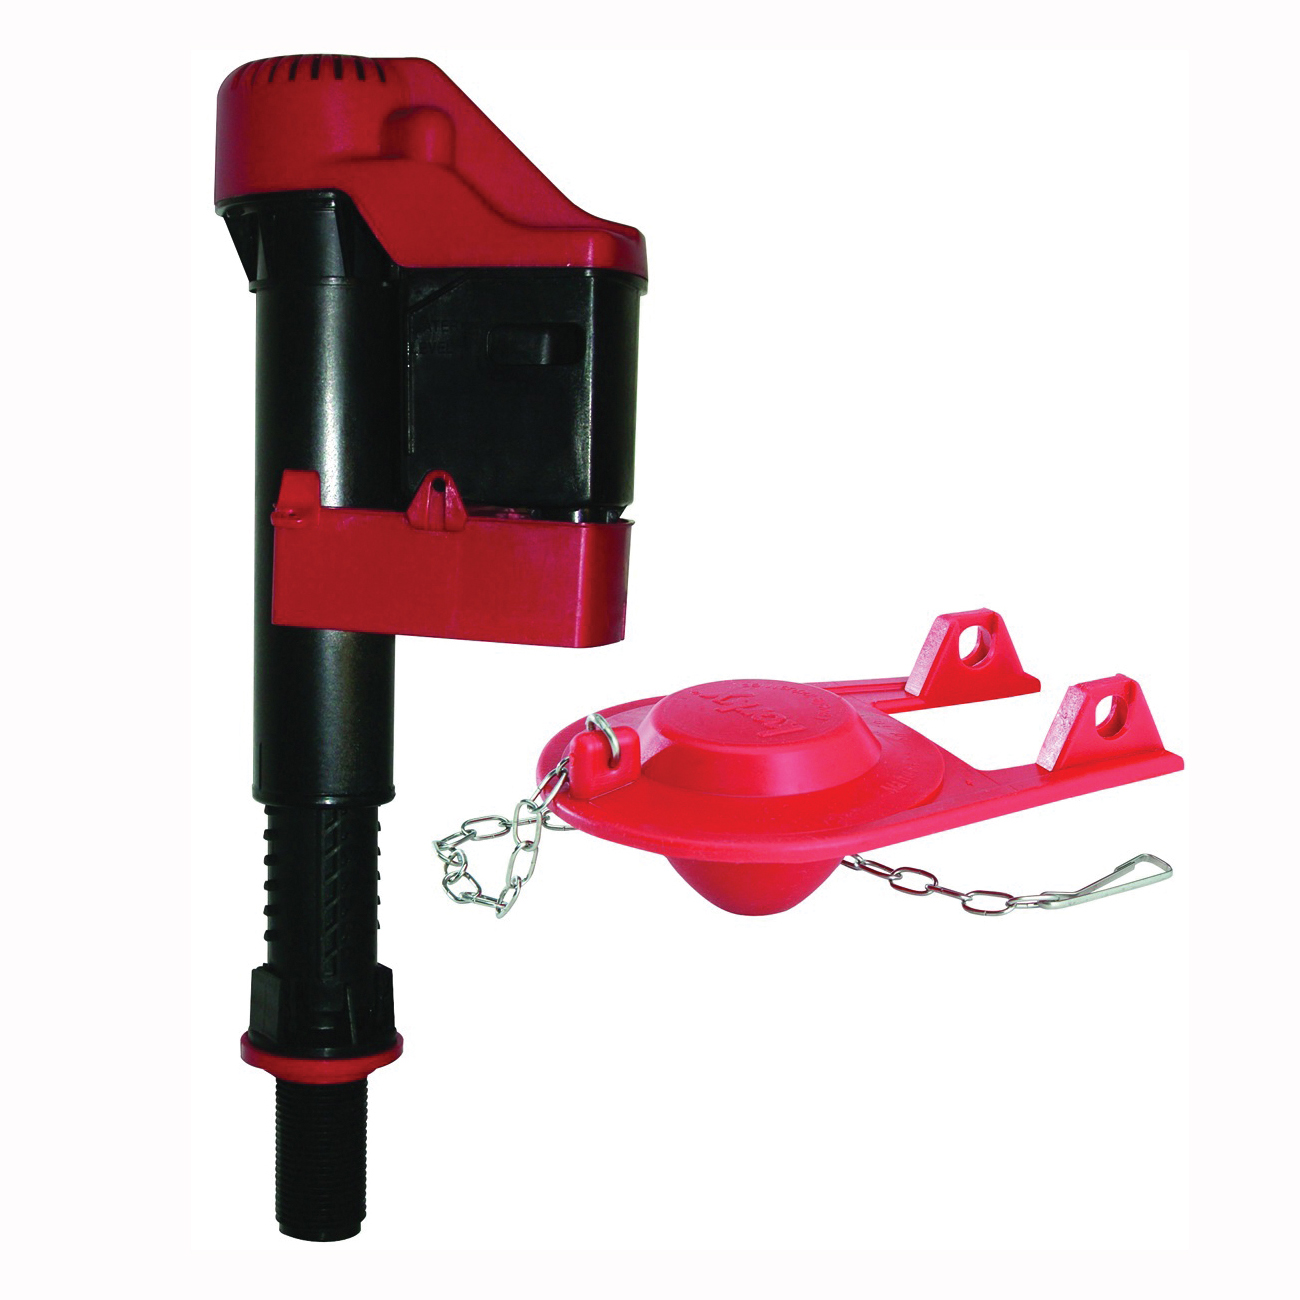 818Z Fill Valve and Flapper Kit, Rubber Body, Black/Red, Anti-Siphon: Yes